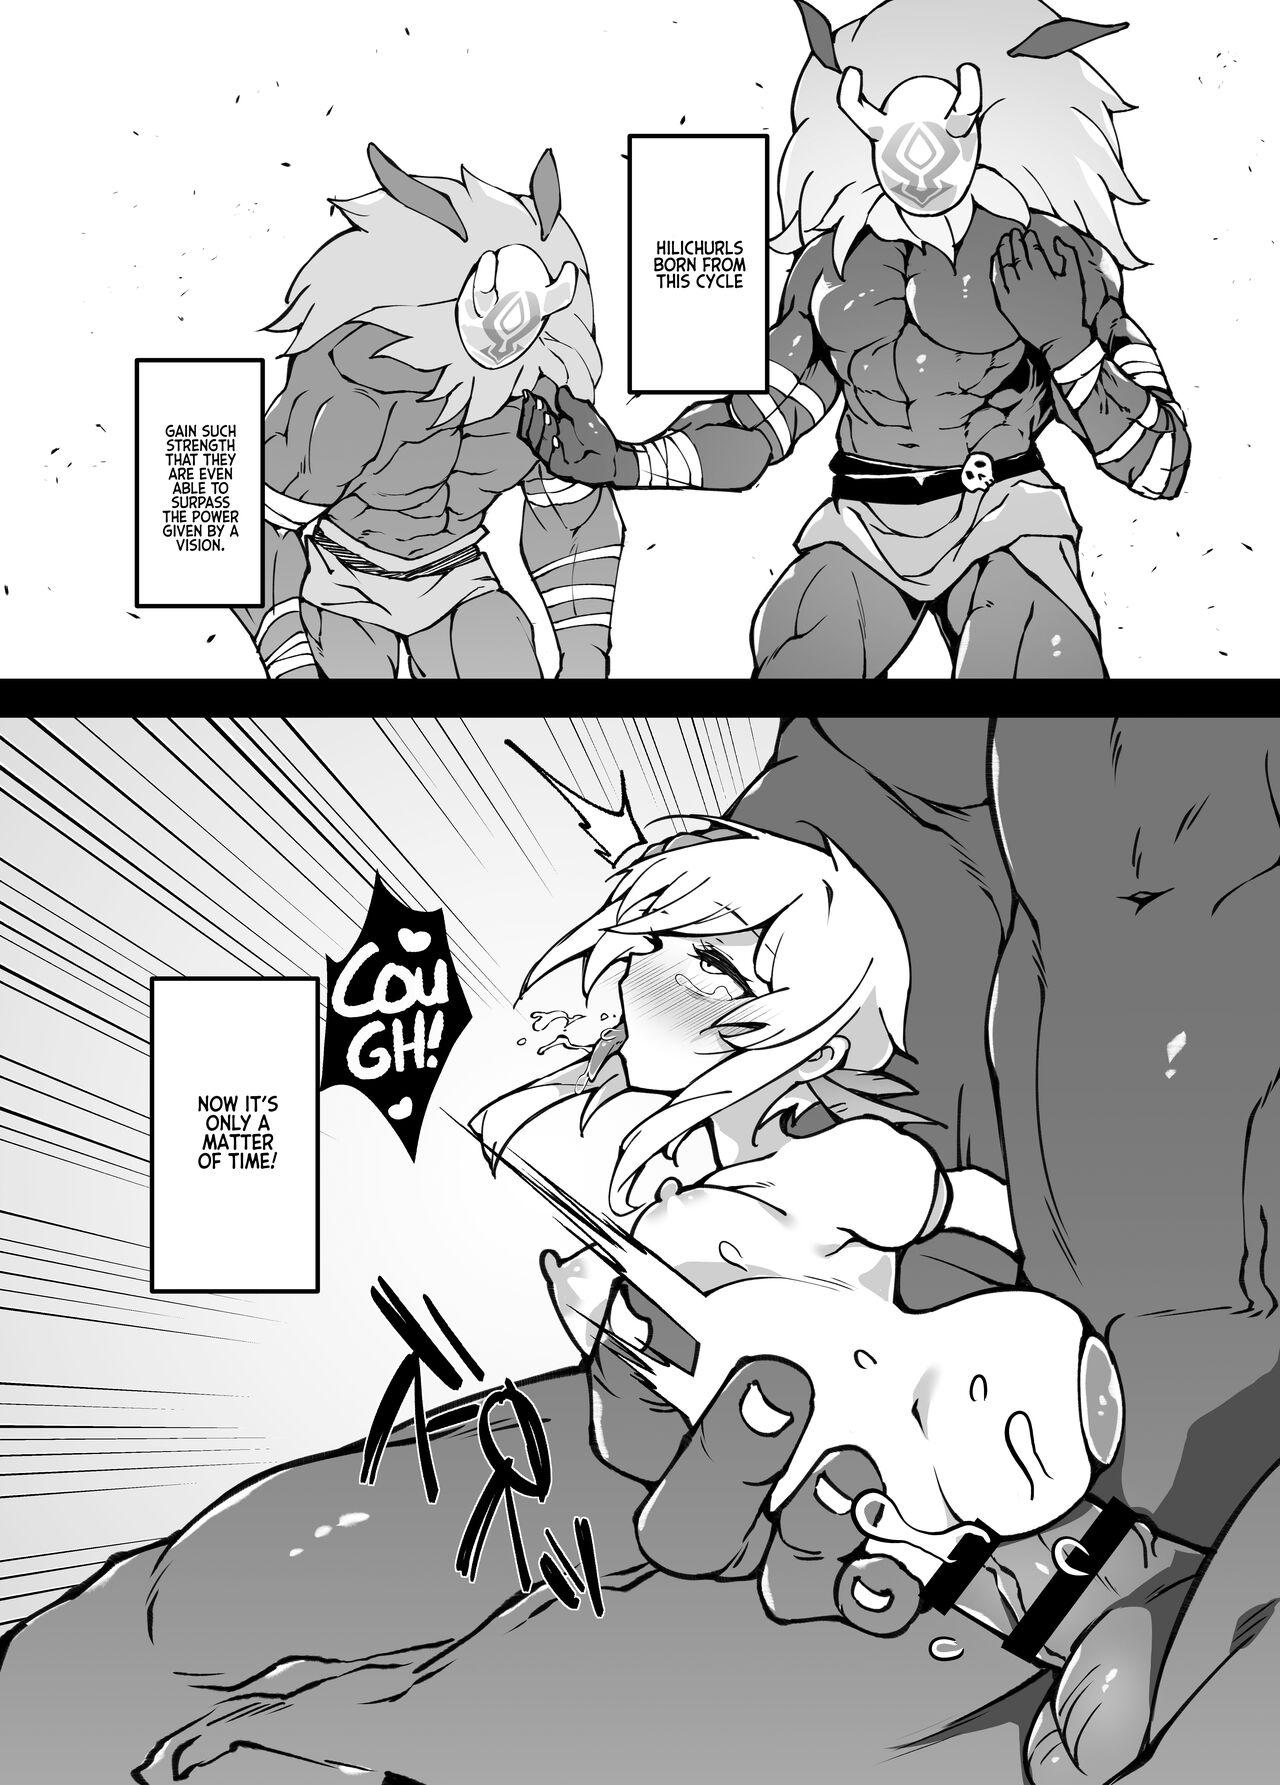 Menage [Karouke (Karou)] The Attack of the Hilichurls II ~The Invasion's Prelude~ Noelle,Chivalric Blossom that withered~ (Genshin Impact) [English] [Kyuume] [Digital] - Genshin impact Free Blow Job - Page 7